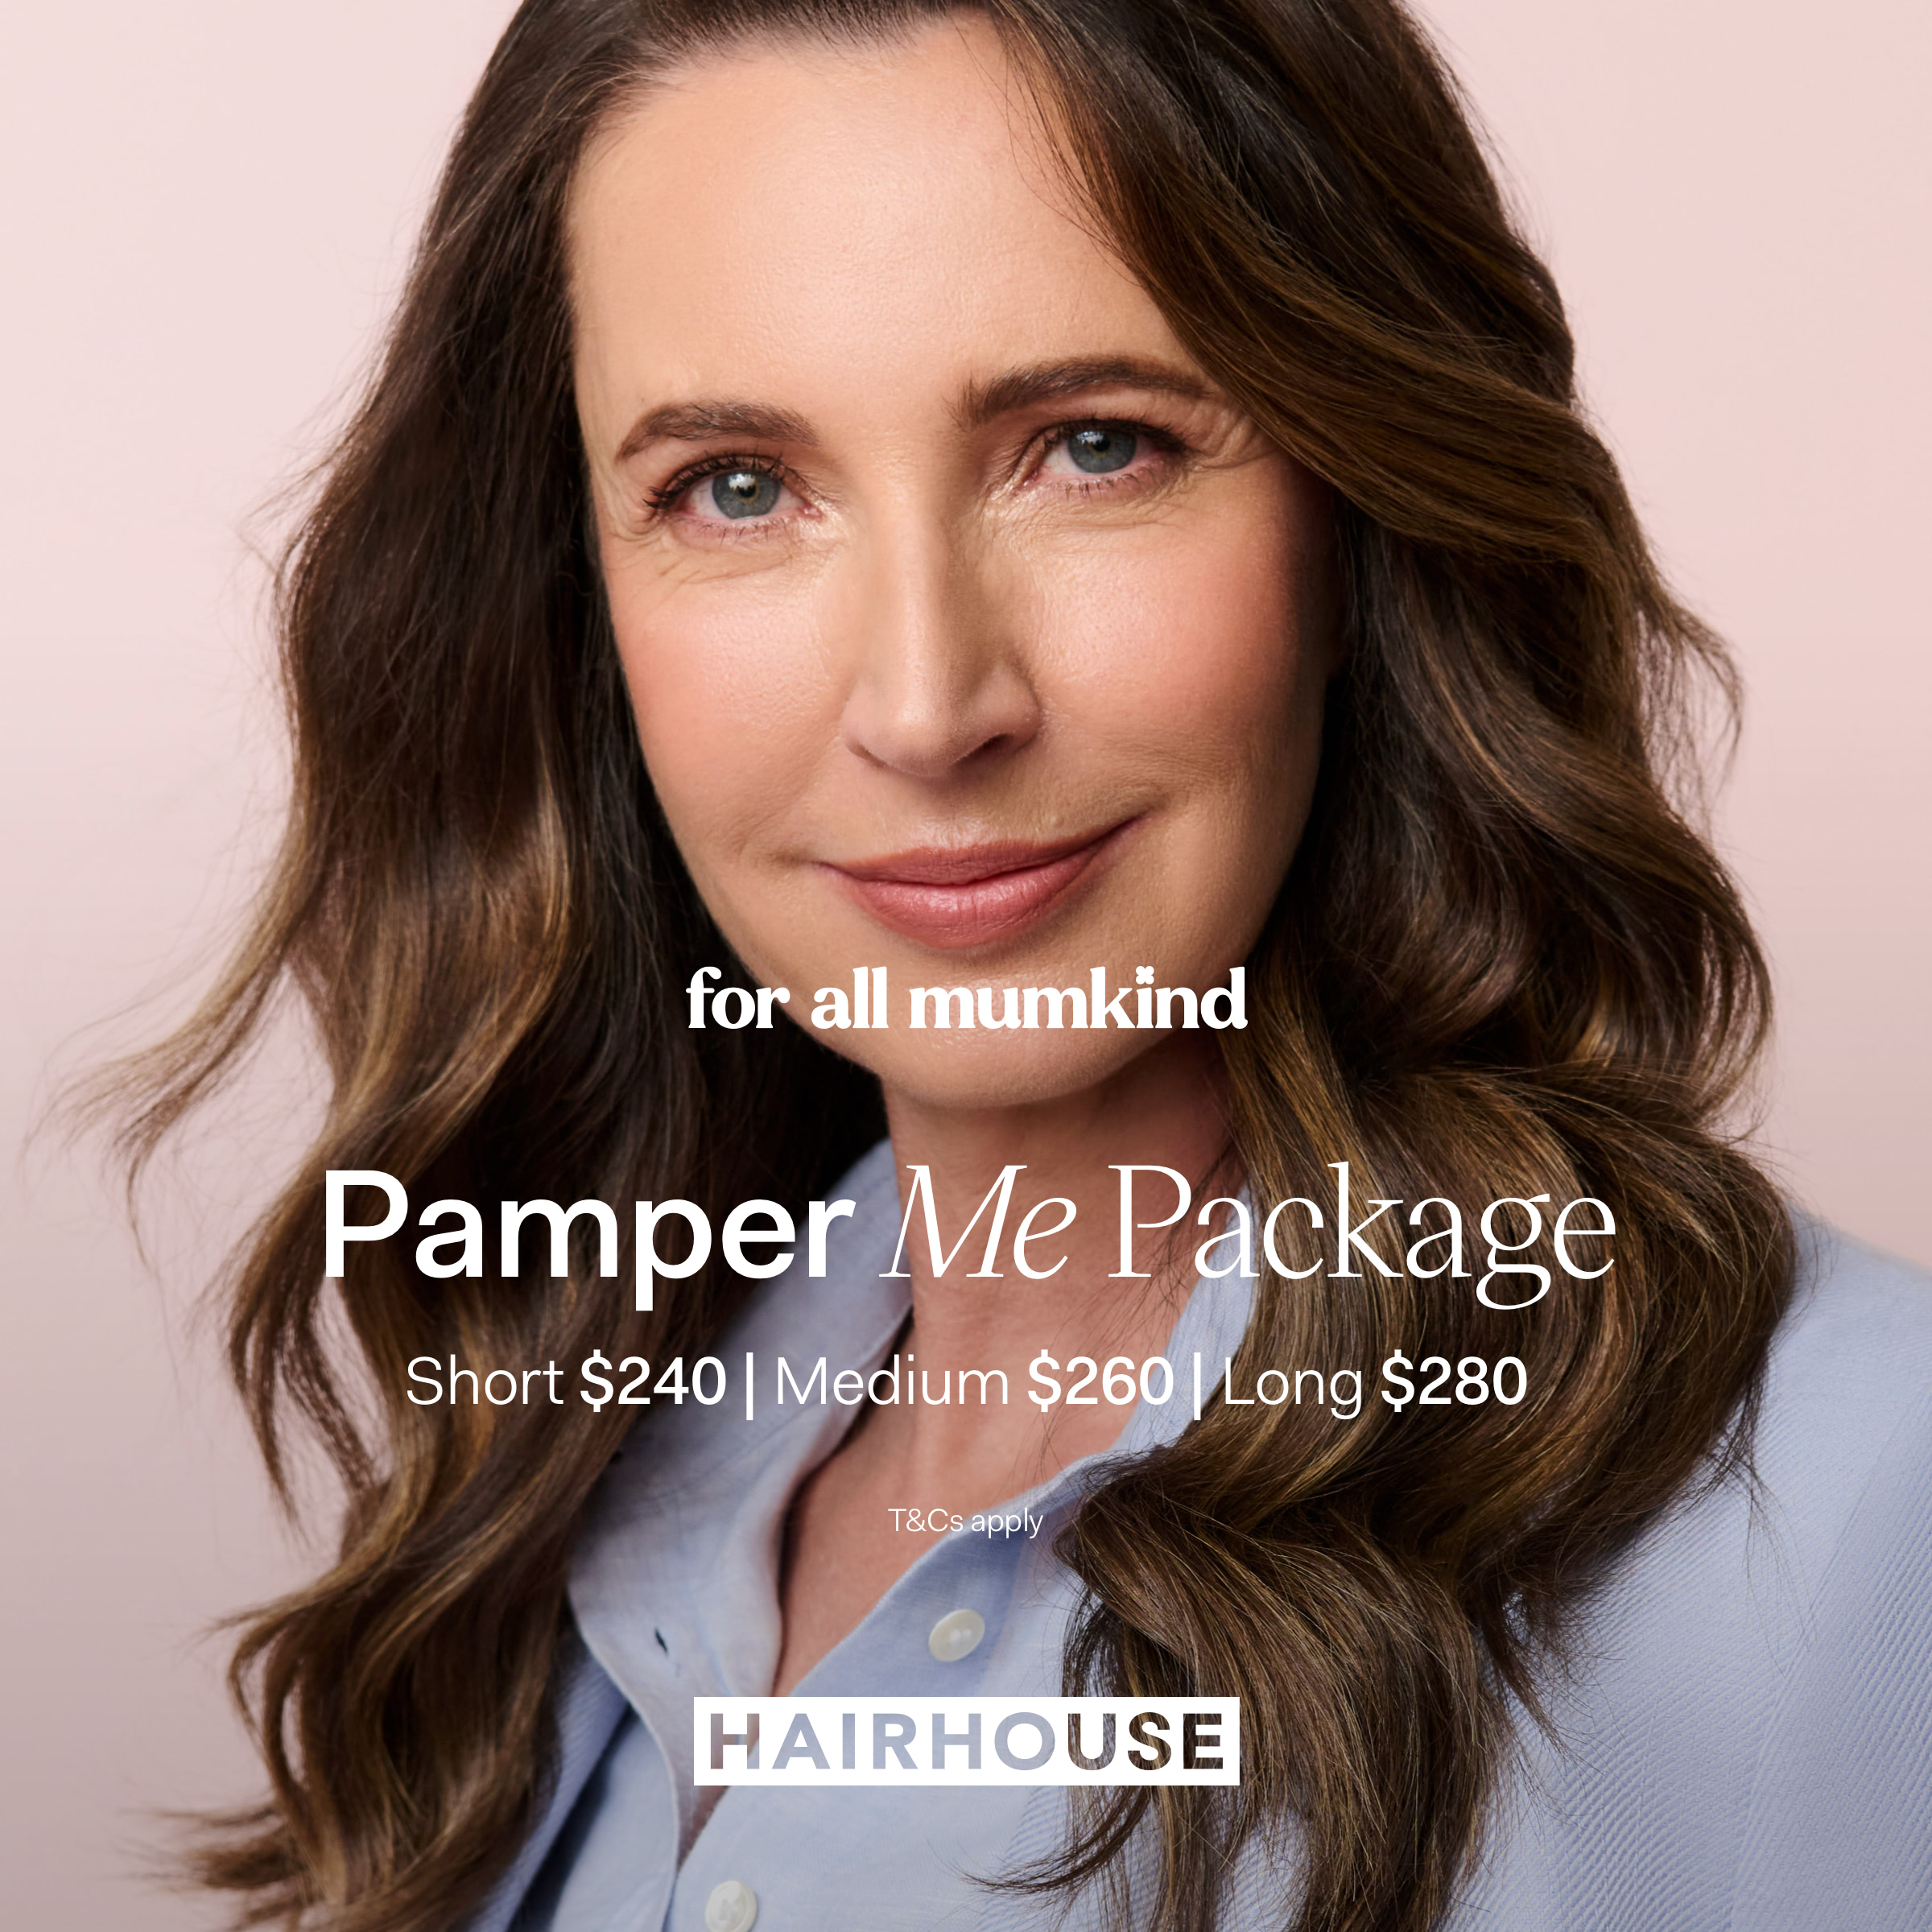 Pamper Me Package from Hairhouse